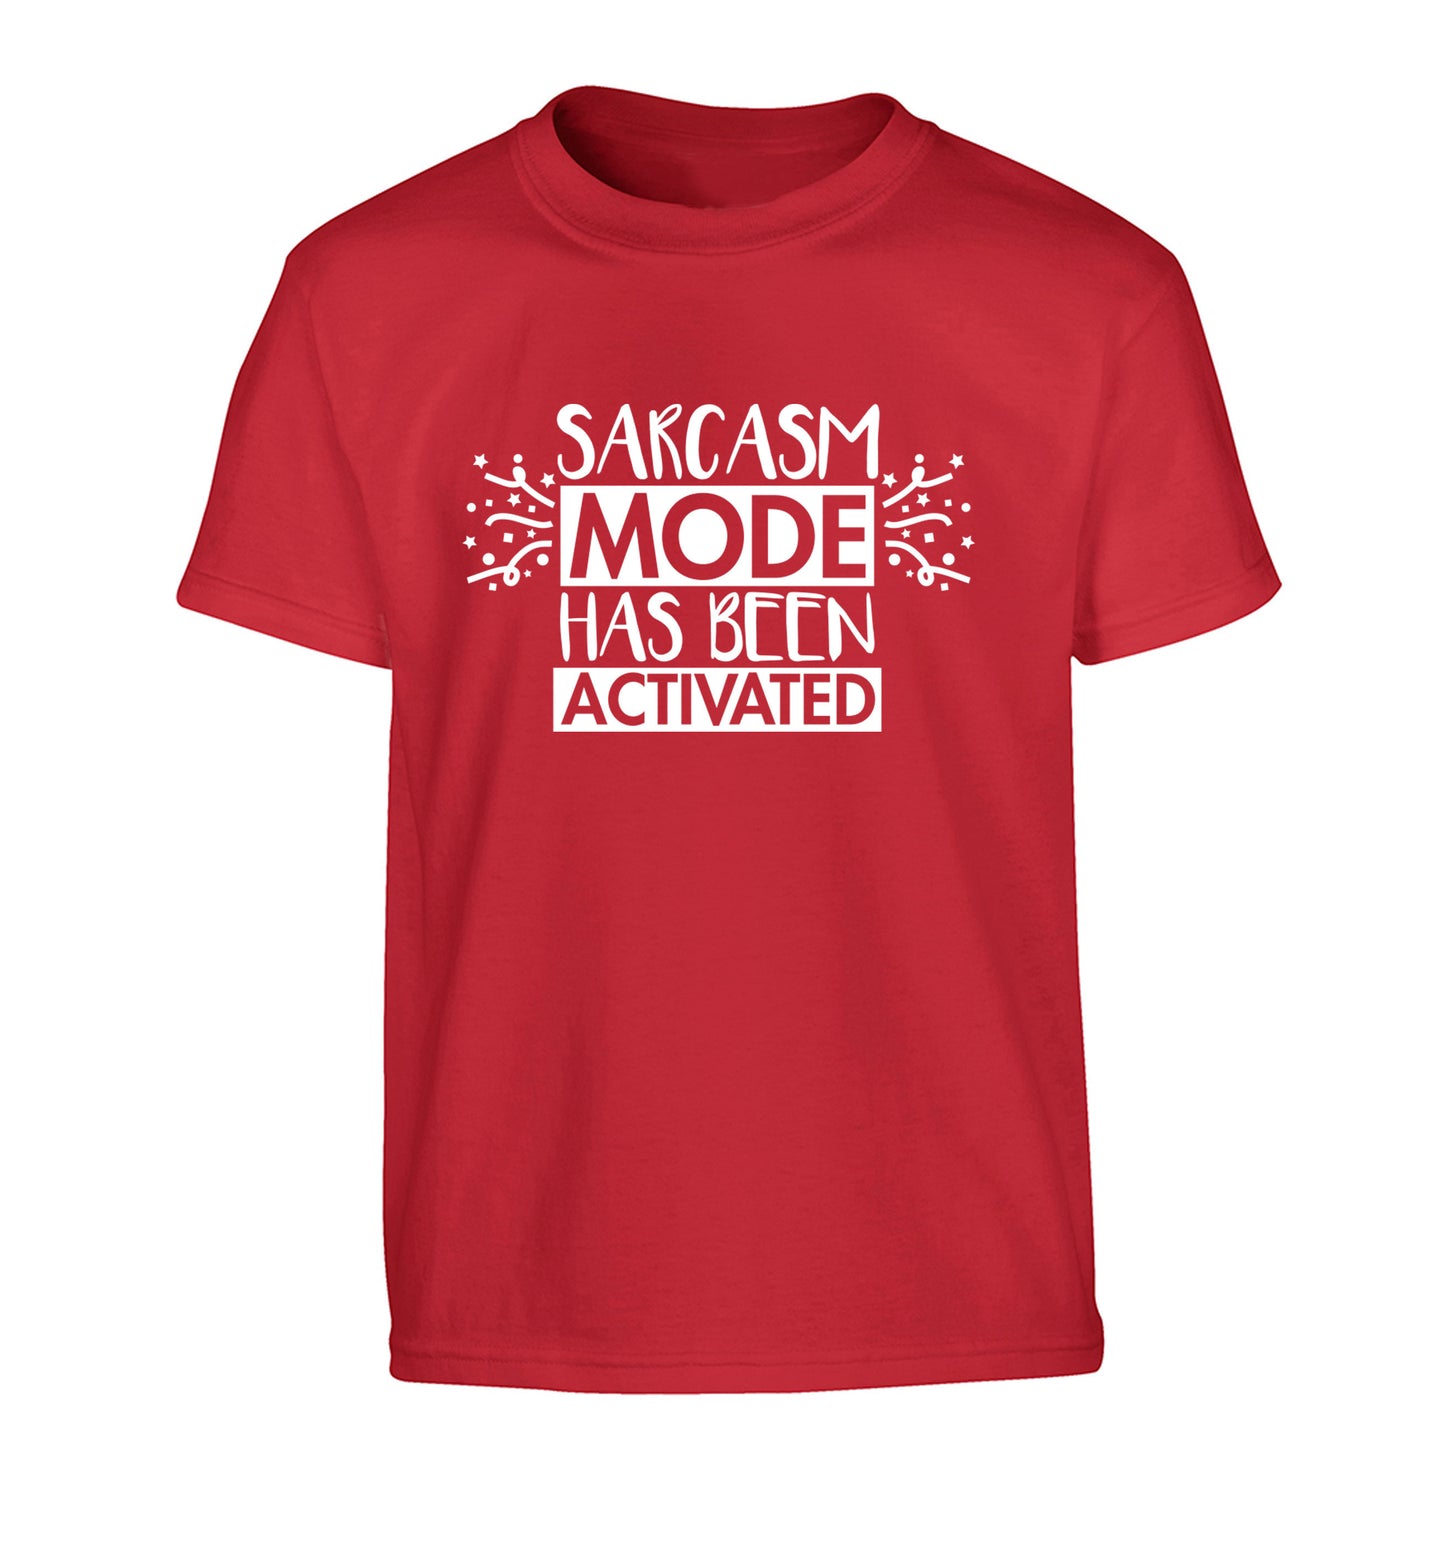 Sarcarsm mode has been activated Children's red Tshirt 12-14 Years